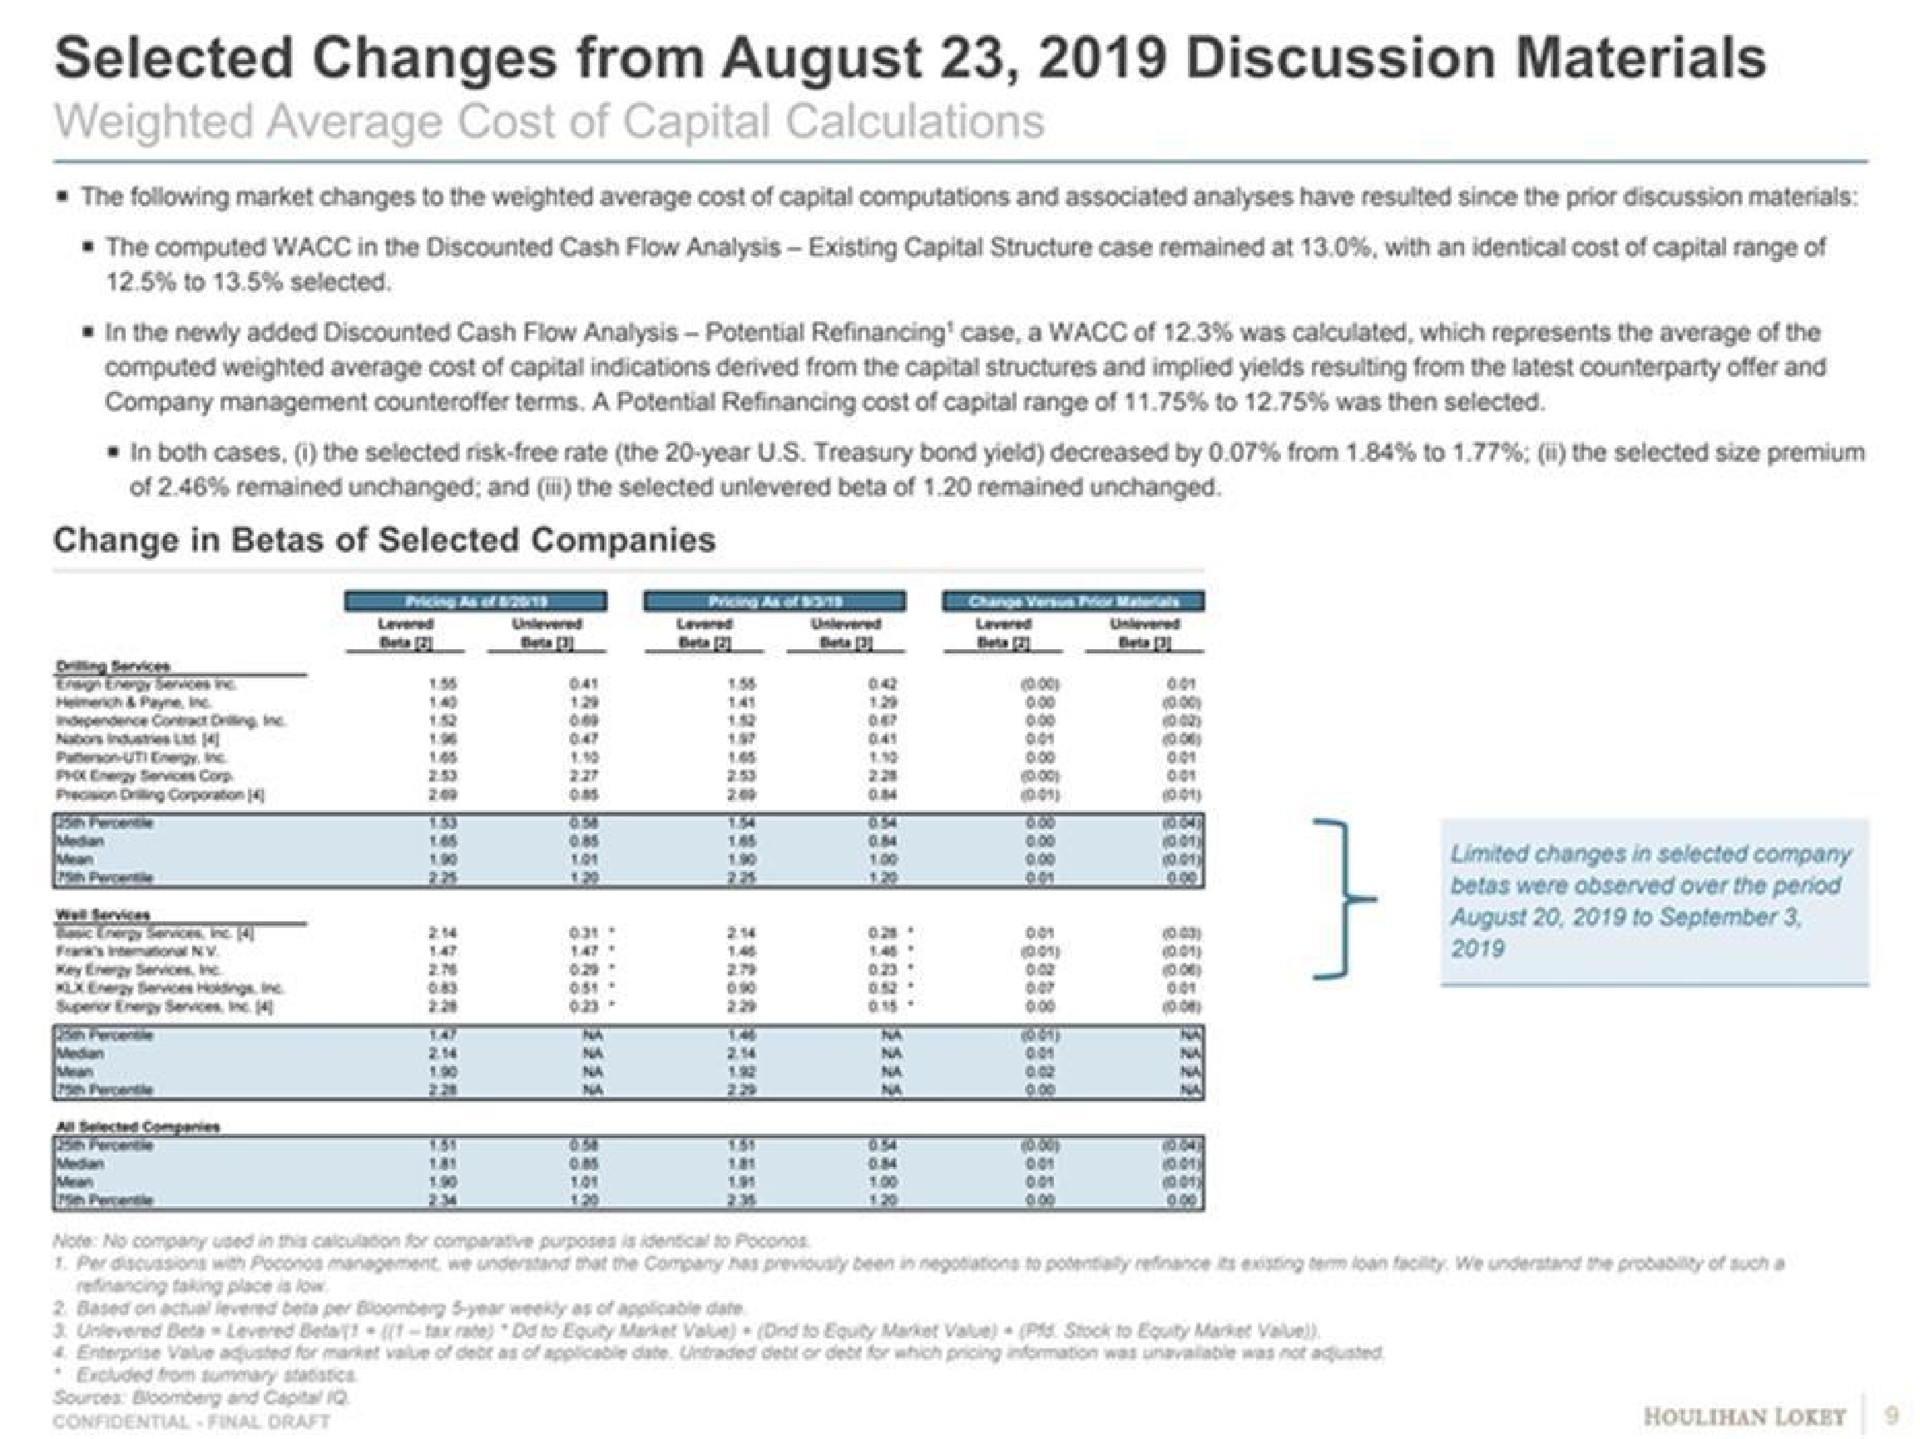 selected changes from august discussion materials weighted average cost of capital calculations | Goldman Sachs